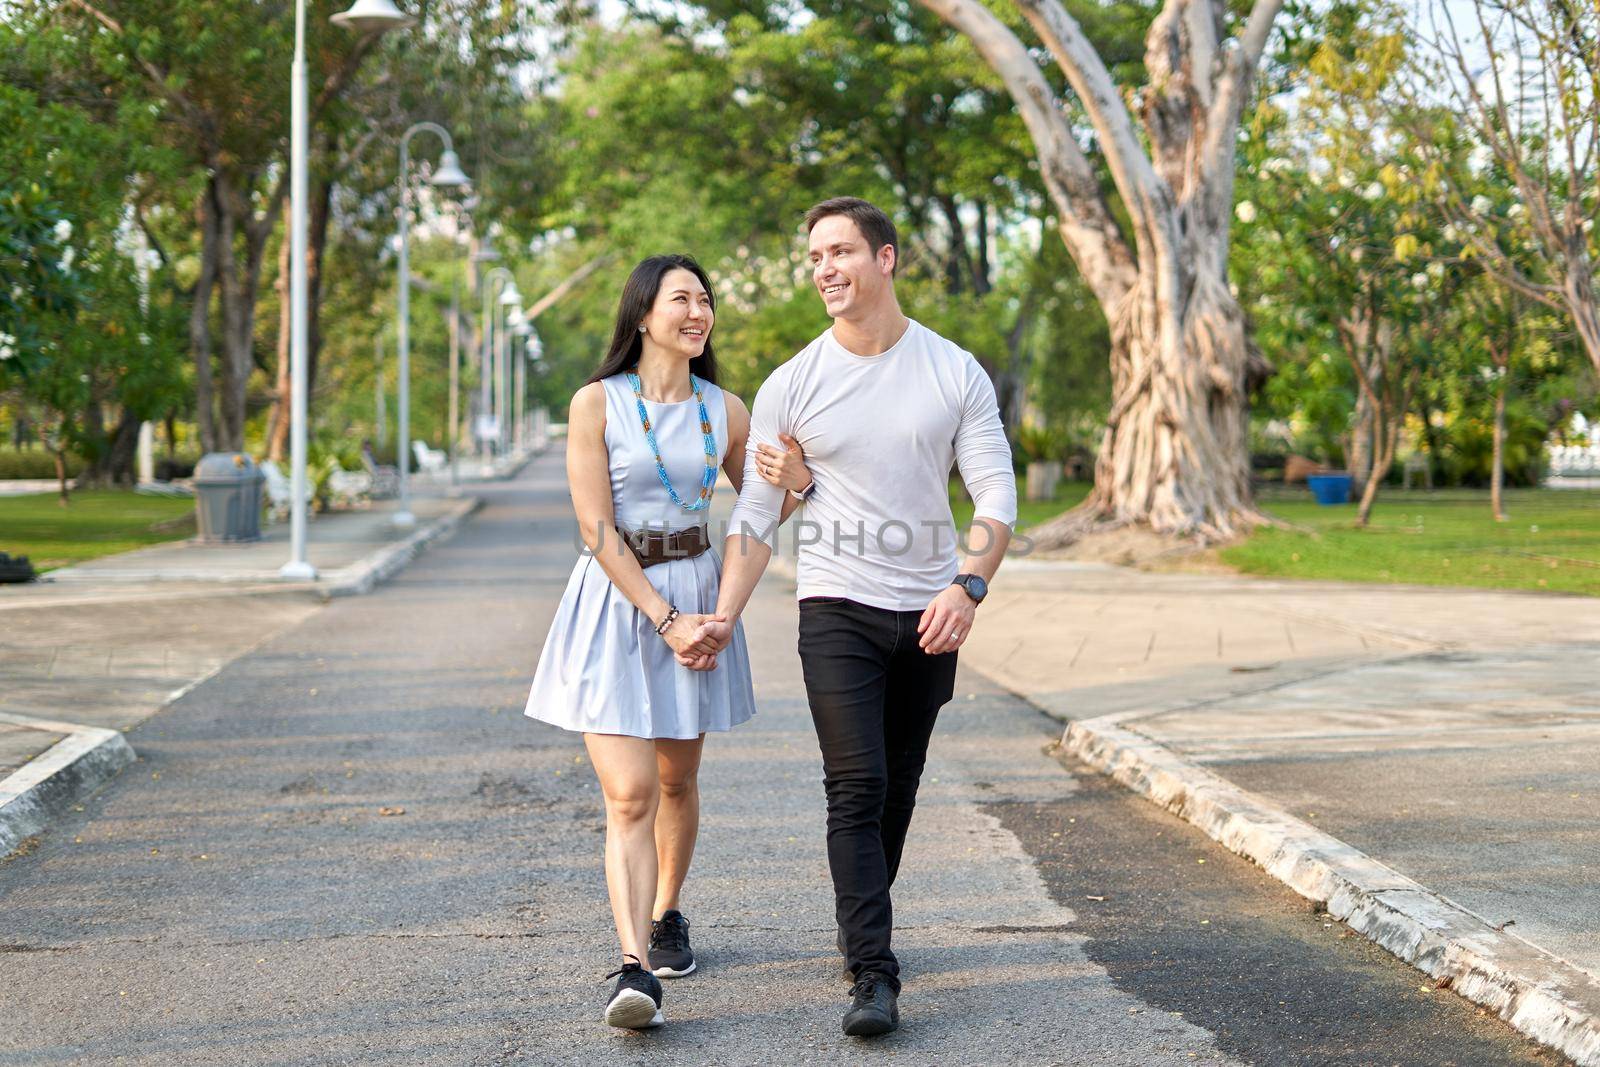 Newly married multicultural couple walking together on a path in a city park during sunset in summer